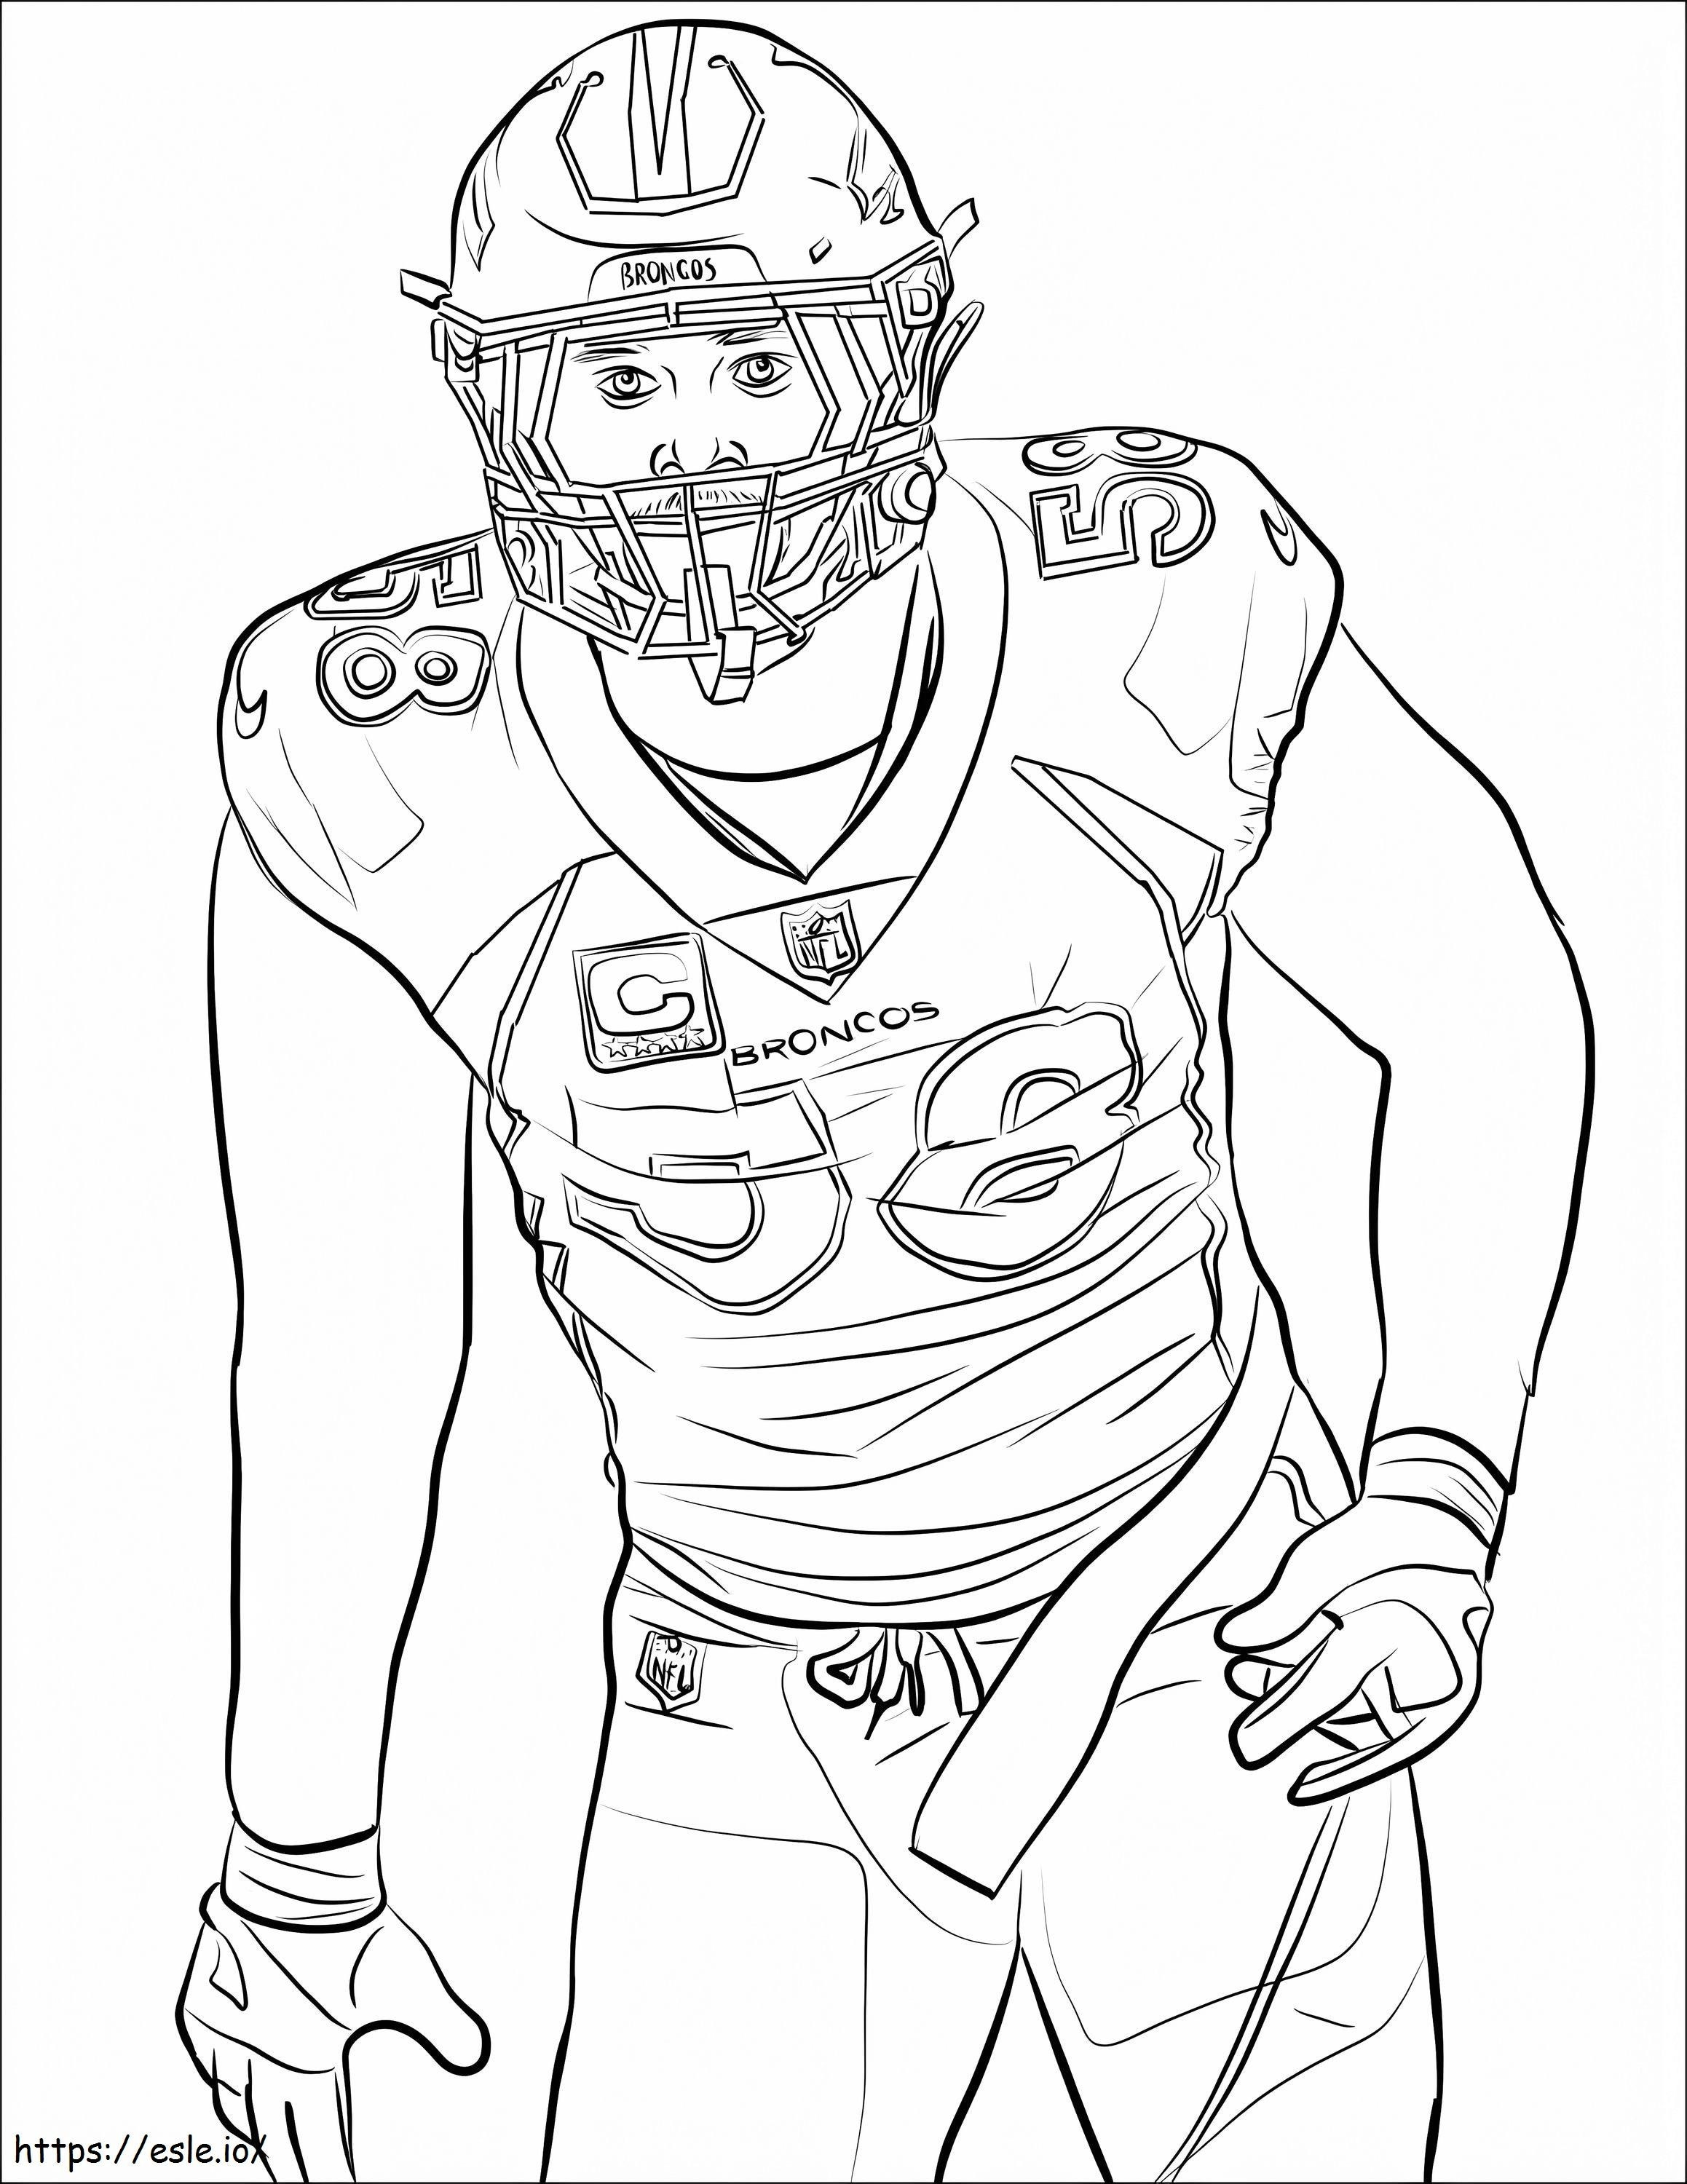 Von Miller Football Player coloring page